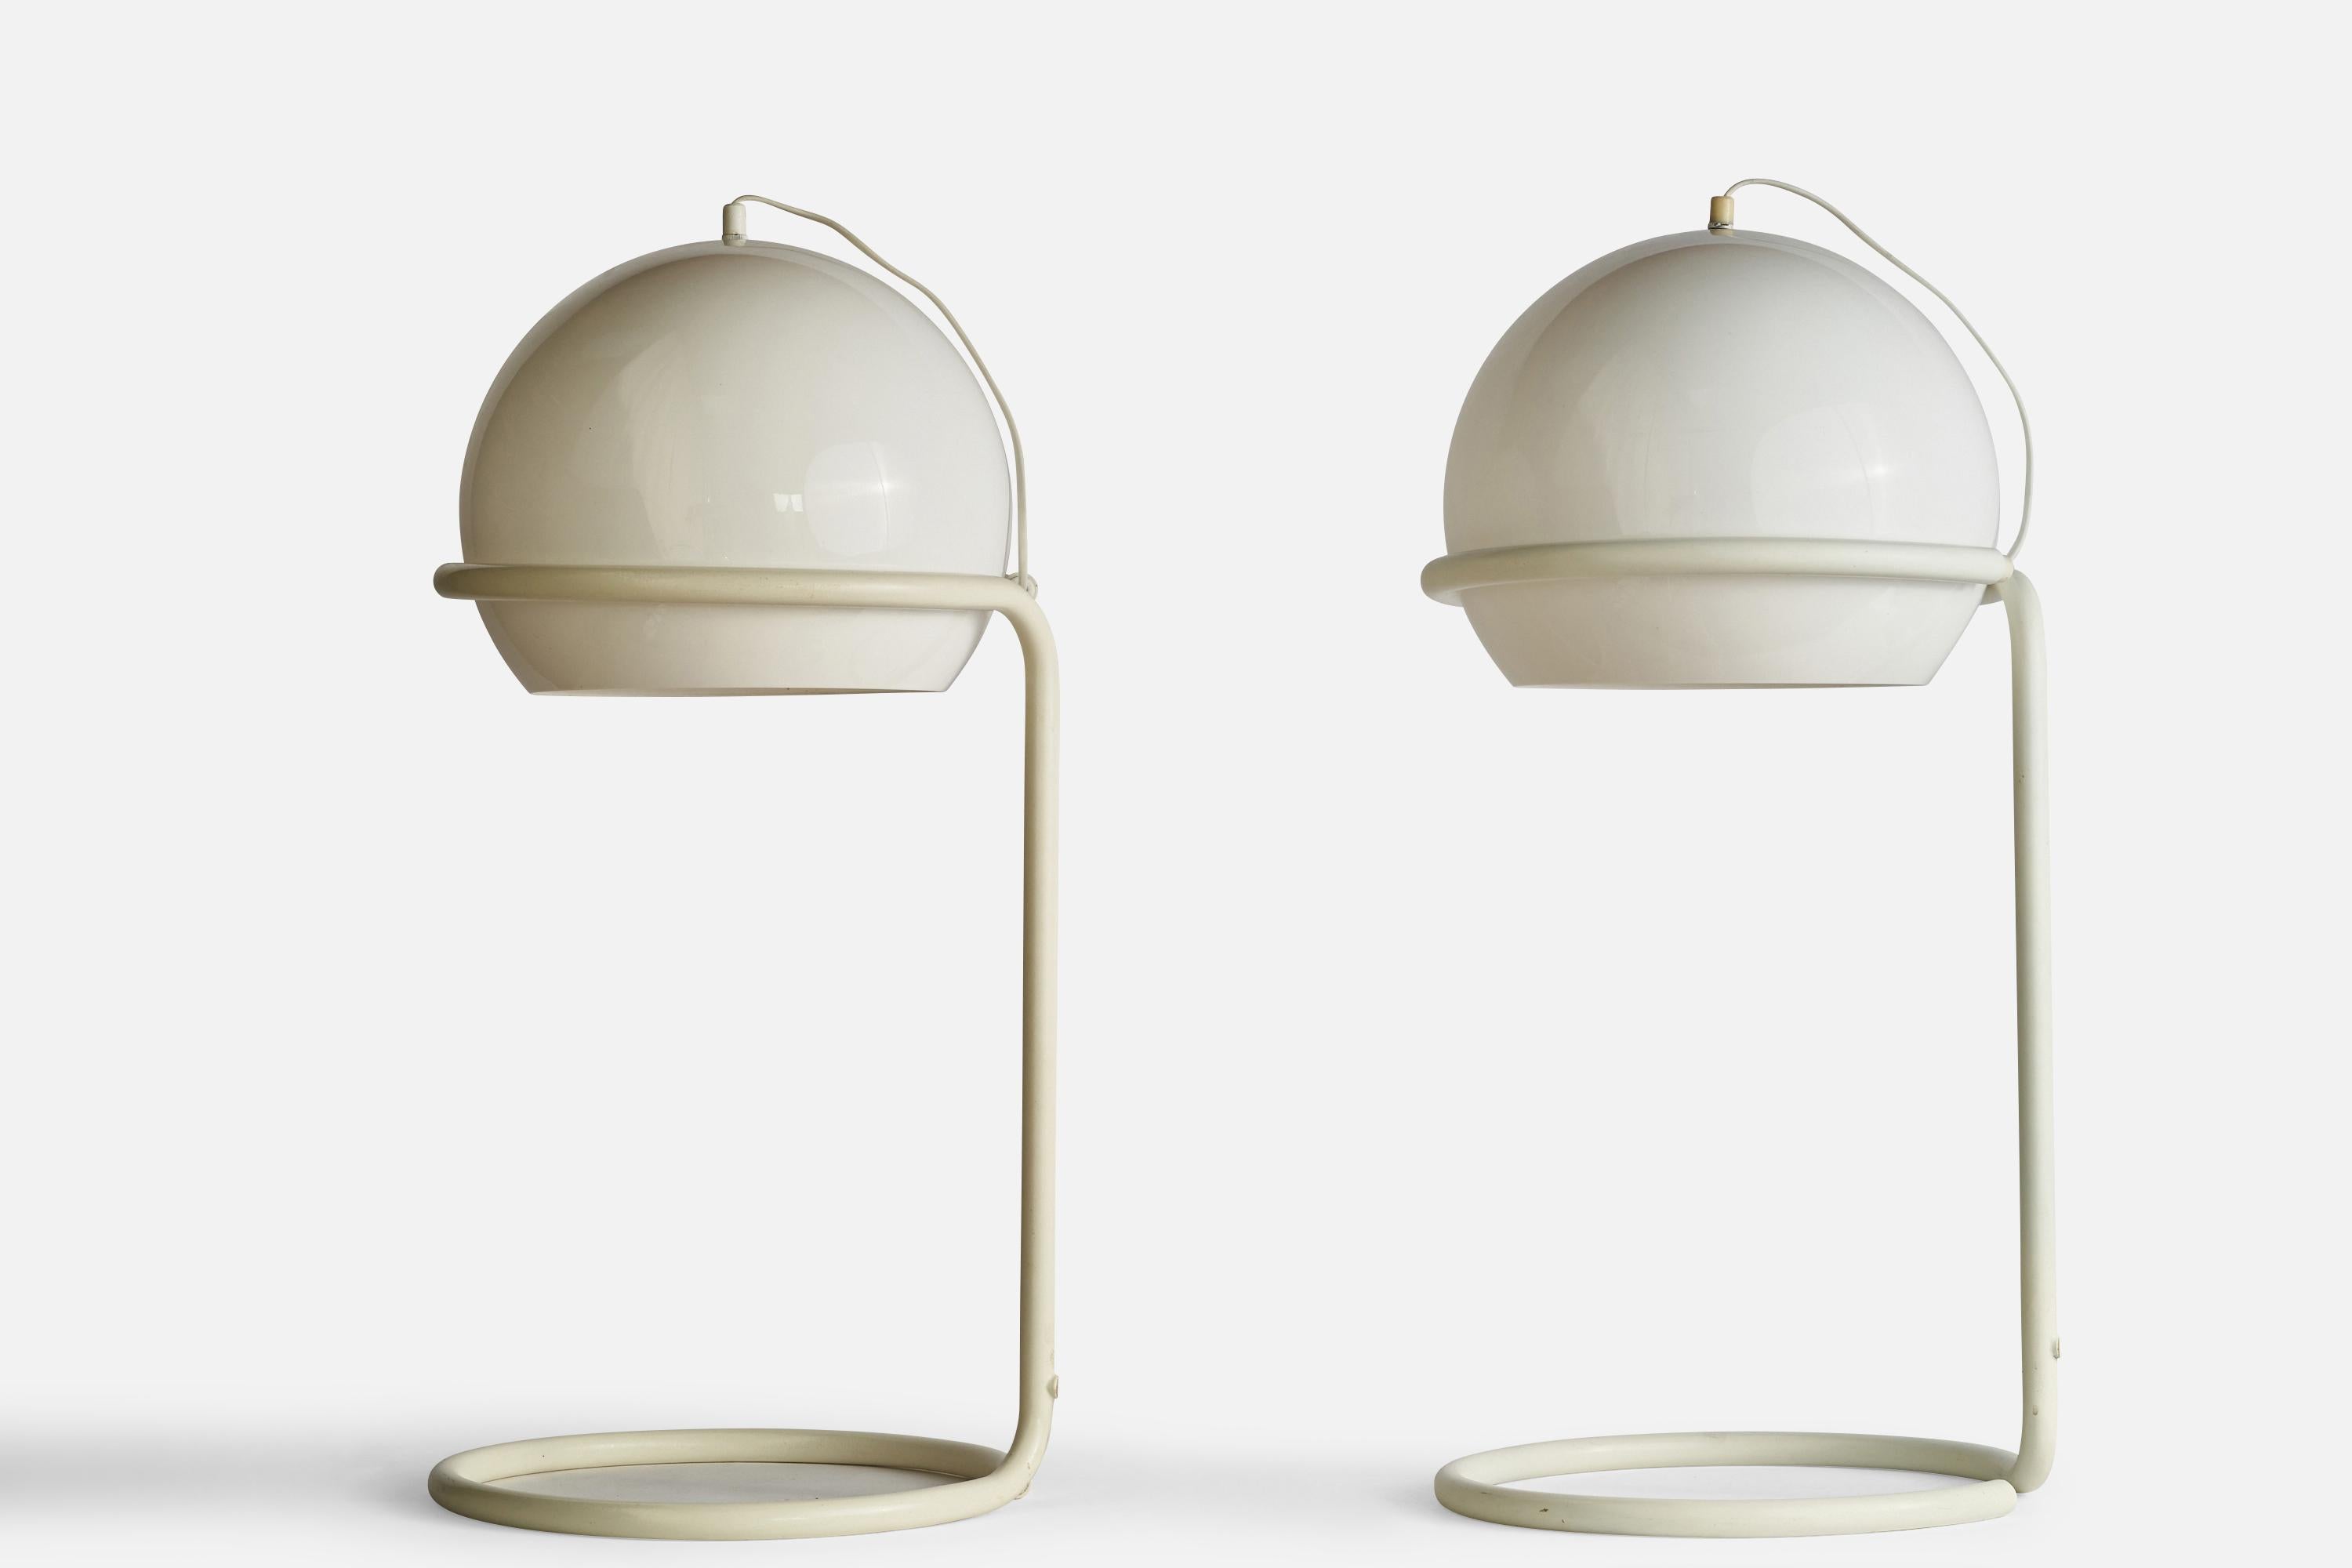 A pair of large white-lacquered metal and acrylic table lamps designed by Ruud Ekstrand for Bergboms, Sweden, 1970s.

Overall Dimensions (inches): 27.50 “ H x 12.75 “ diameter 
Bulb Specifications: E-26 Bulb
Number of Sockets: 2
All lighting will be